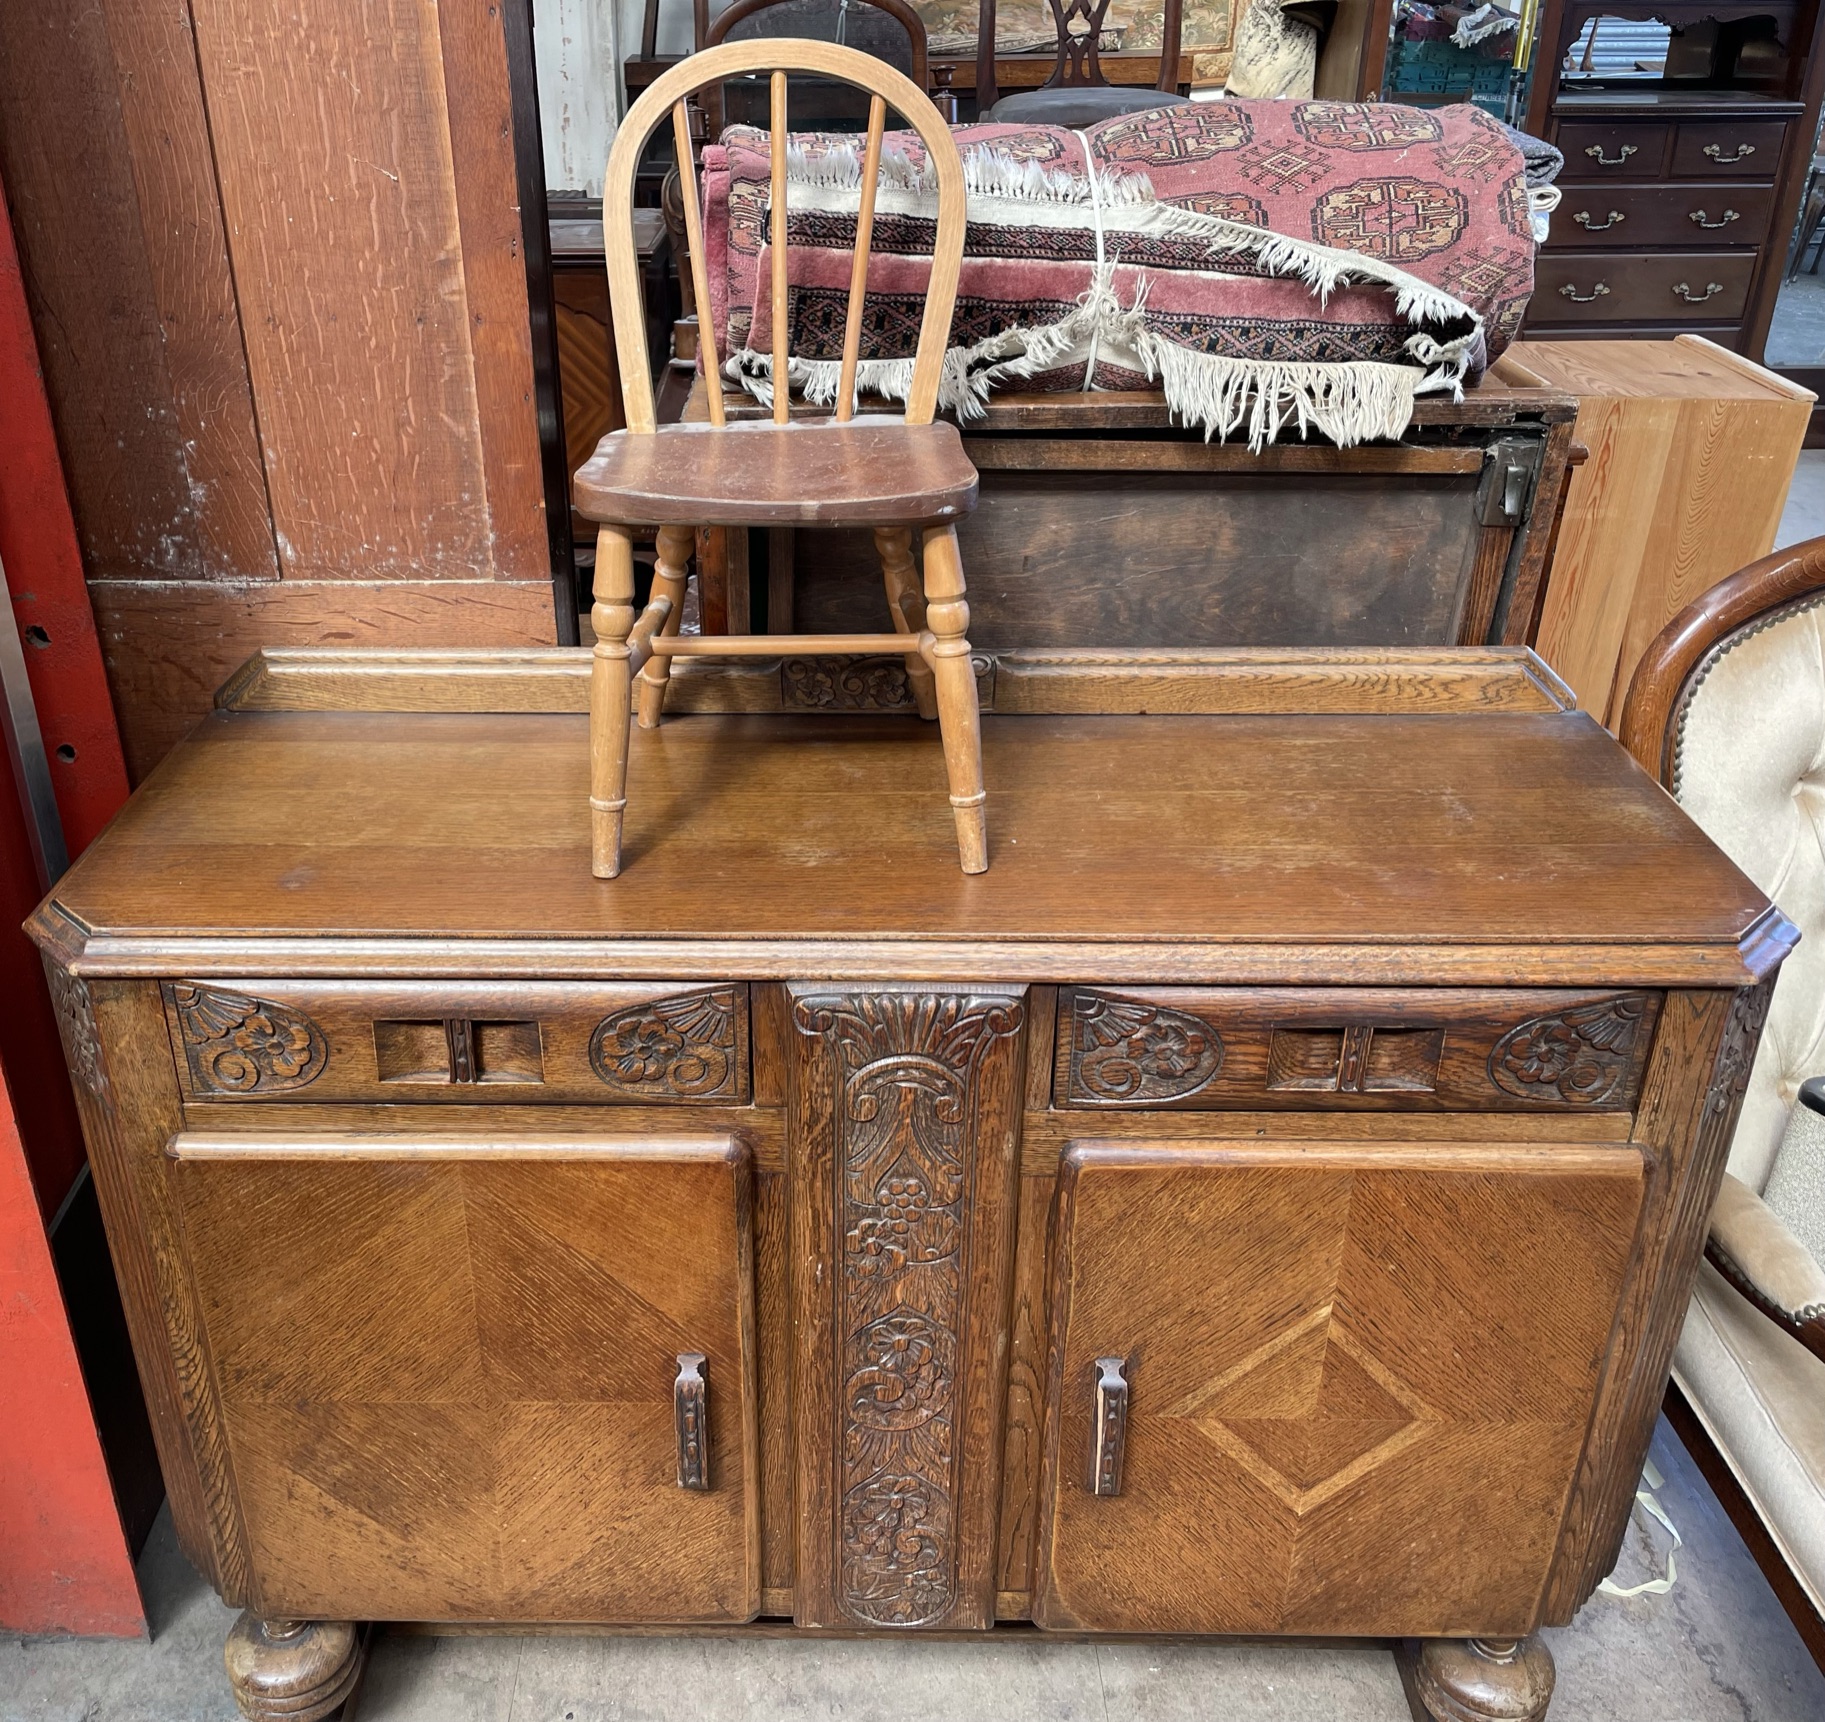 A 20th century oak sideboard with two drawers and two cupboards together with a child's chair and